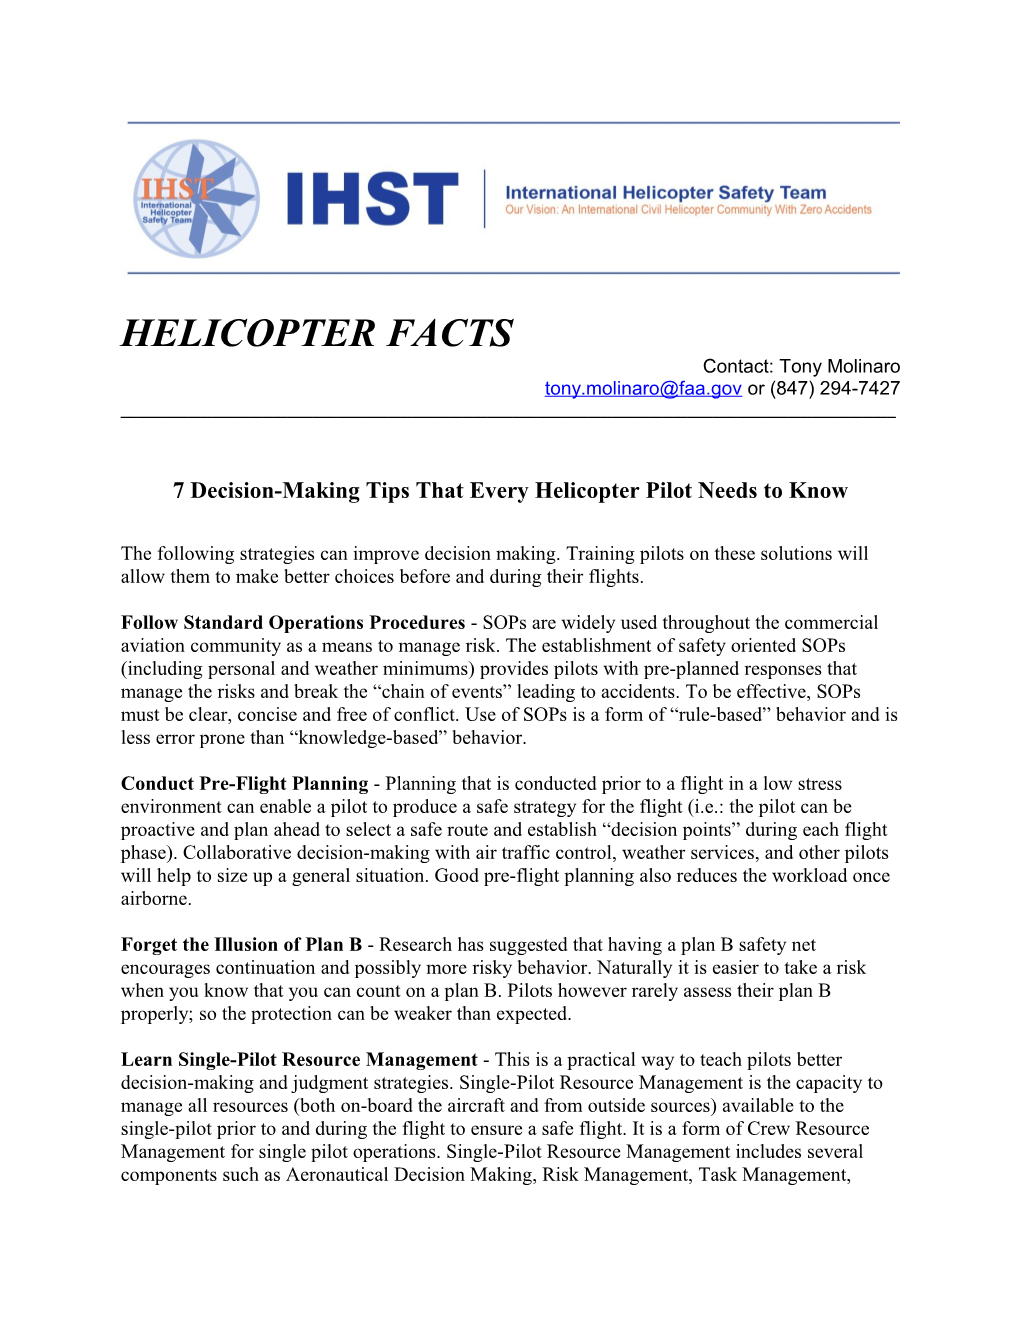 Helicopter Facts